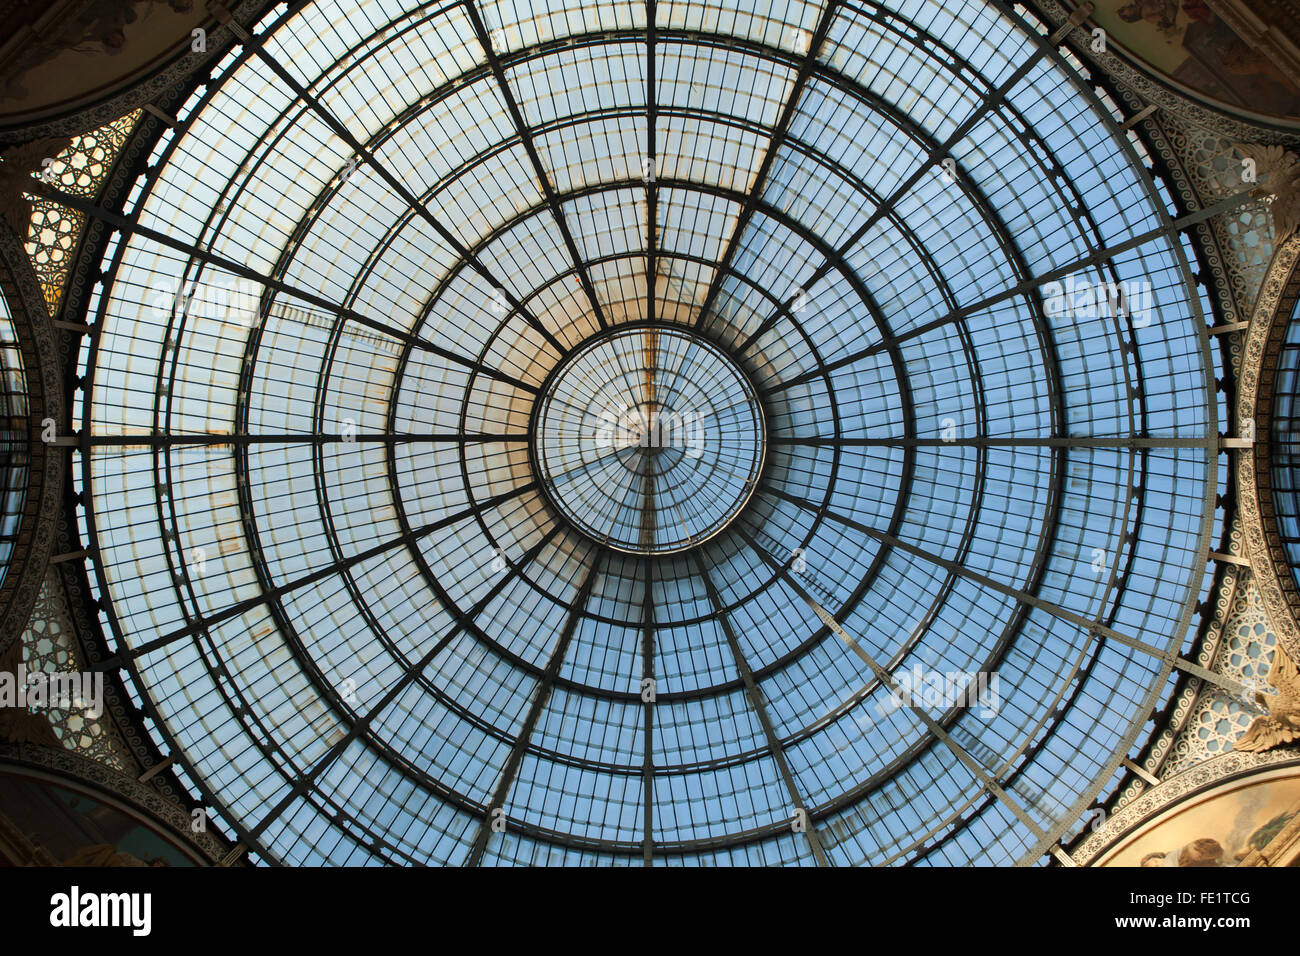 Glass dome of the Galleria Vittorio Emanuele II in Milan, Lombardy, Italy. Stock Photo